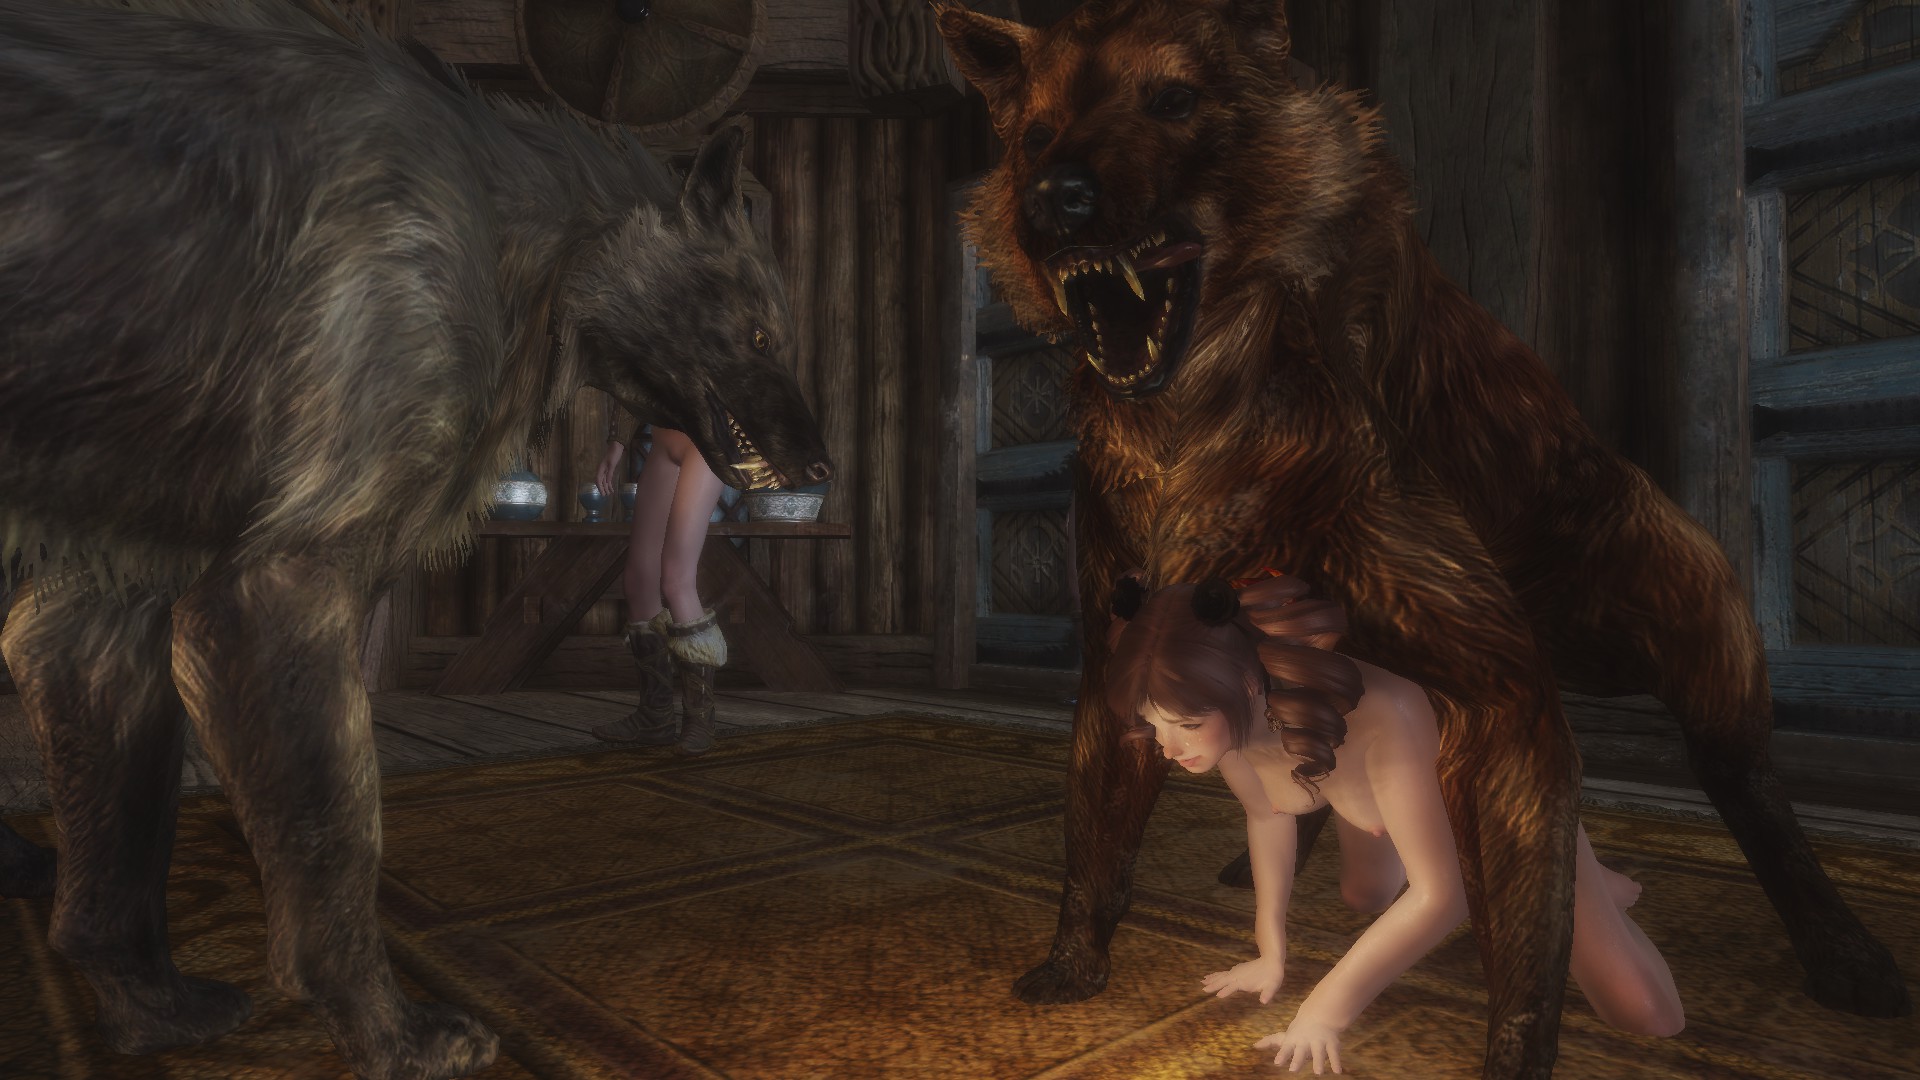 Ps: it seemed to me that the wolves come slightly scaled down